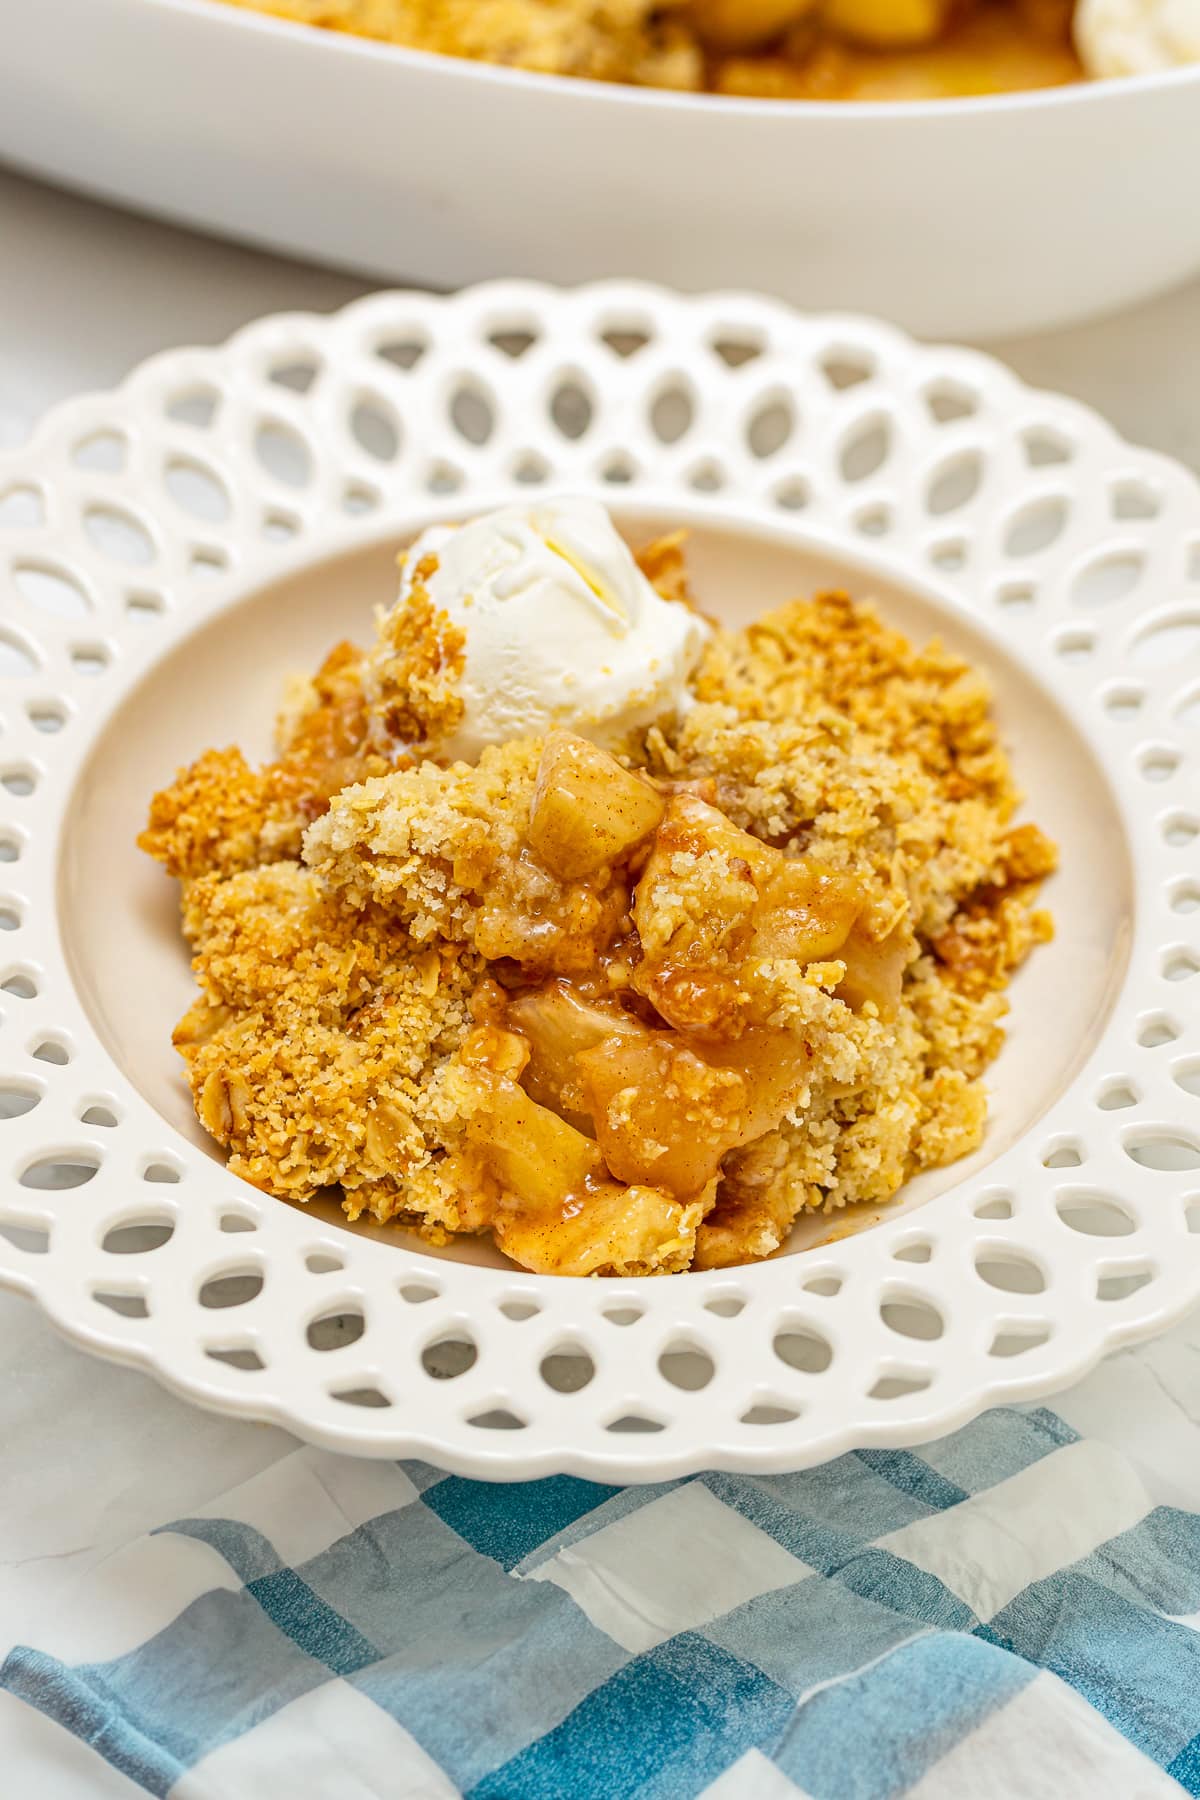 Close look of elegant vintage plate with apple crumble with a scoop of ice cream.